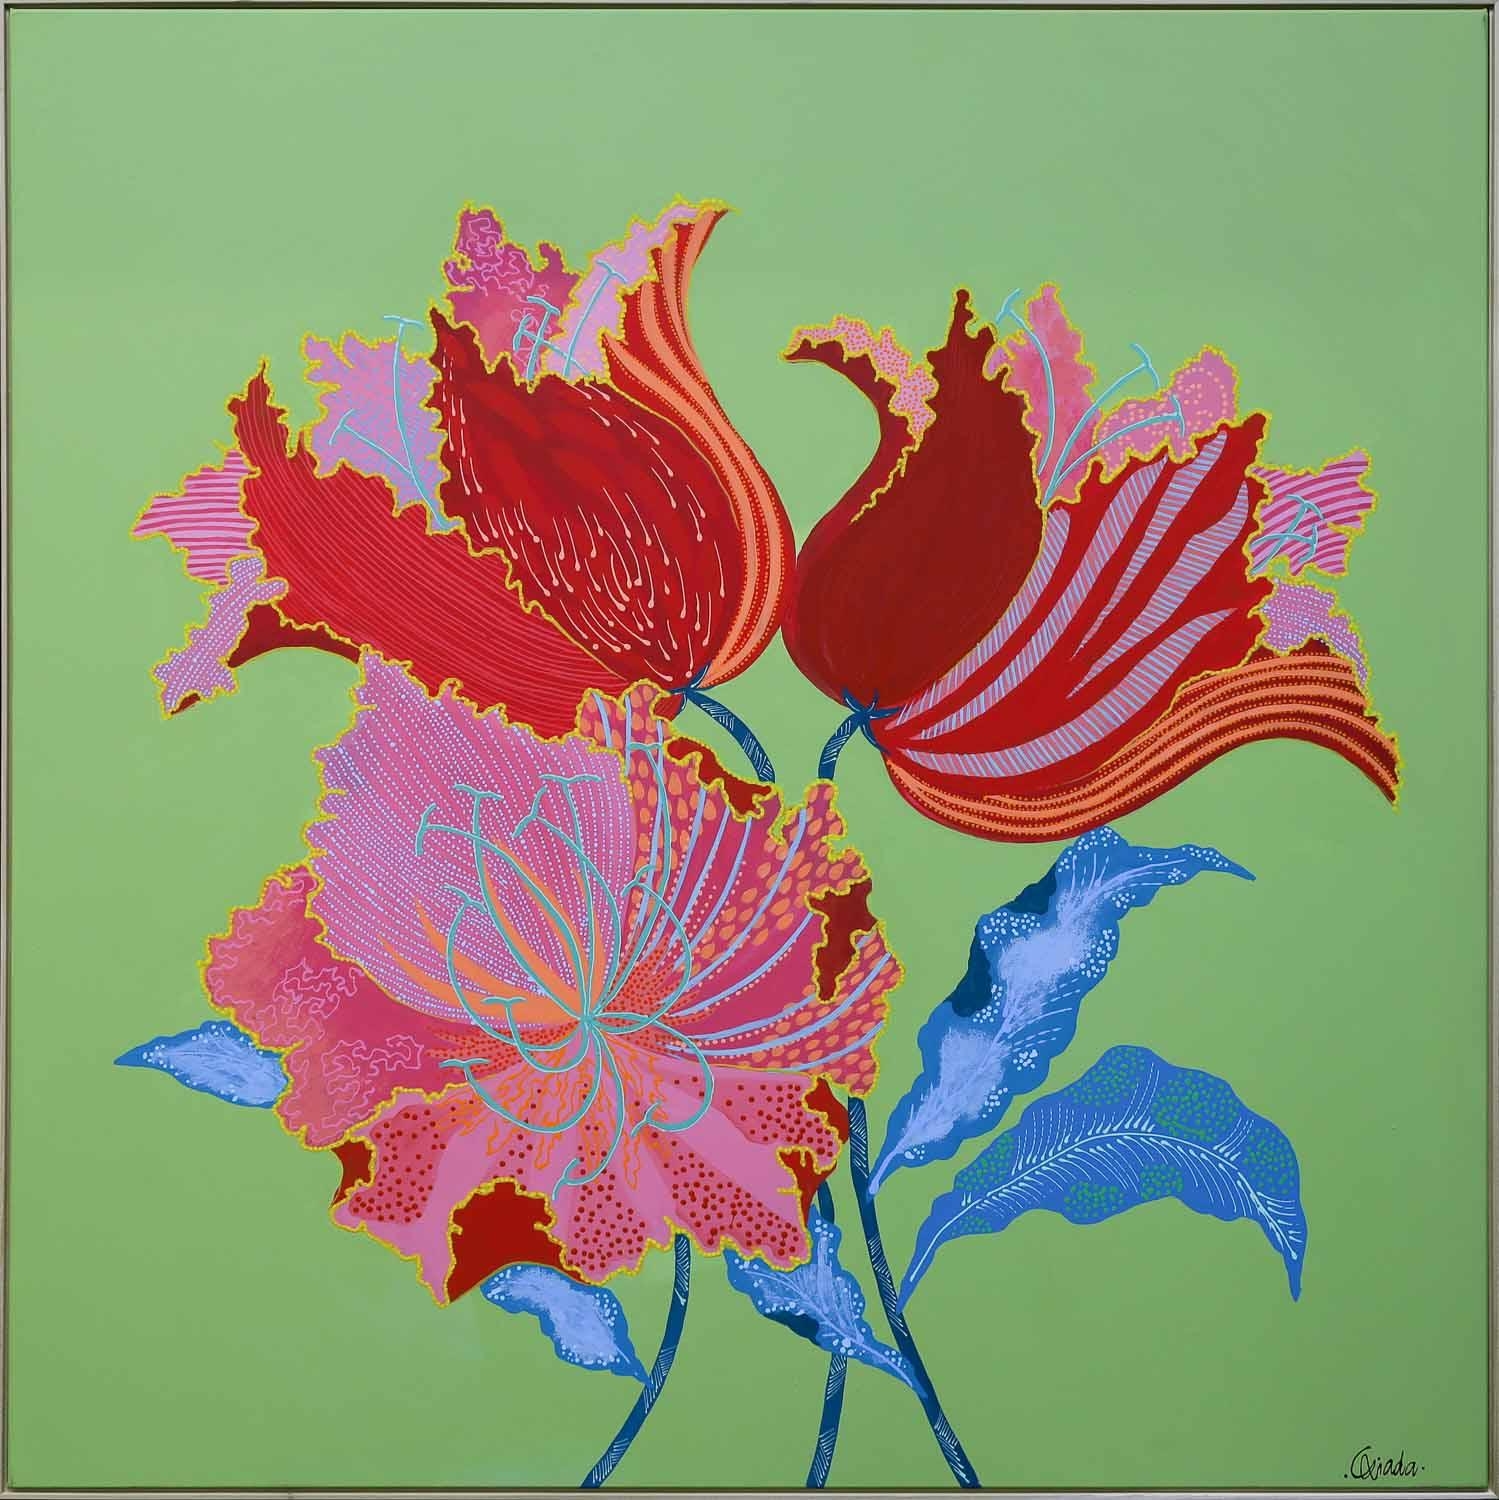 "Hibiscus Exotic" by Giada Pasquetto, Painted in 2022.